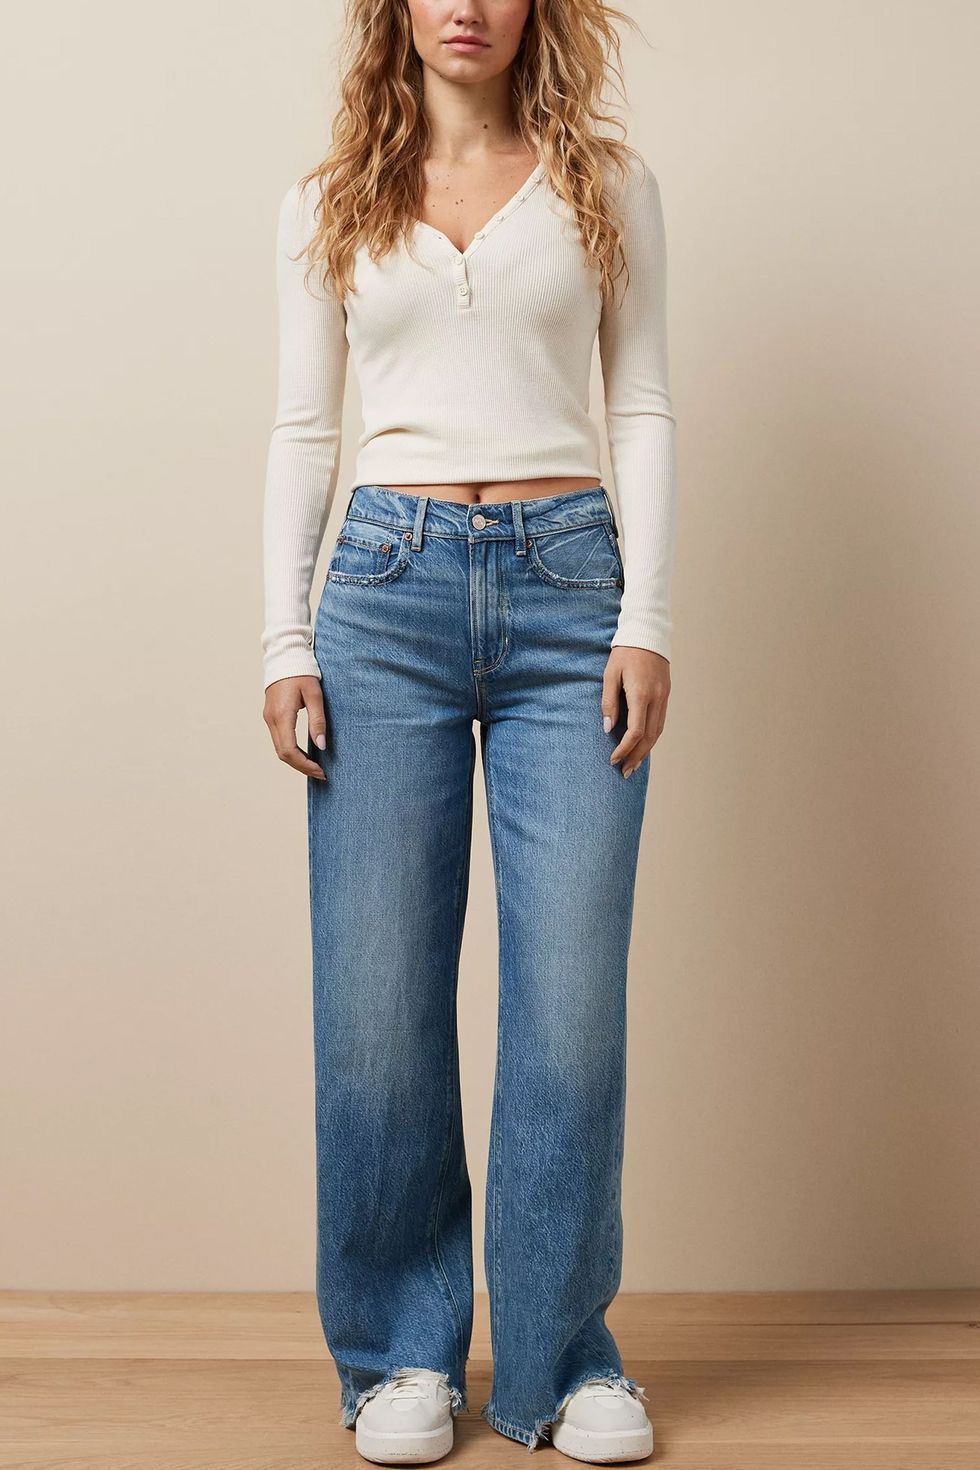 American Eagle Launches Extended Size Denim Collection